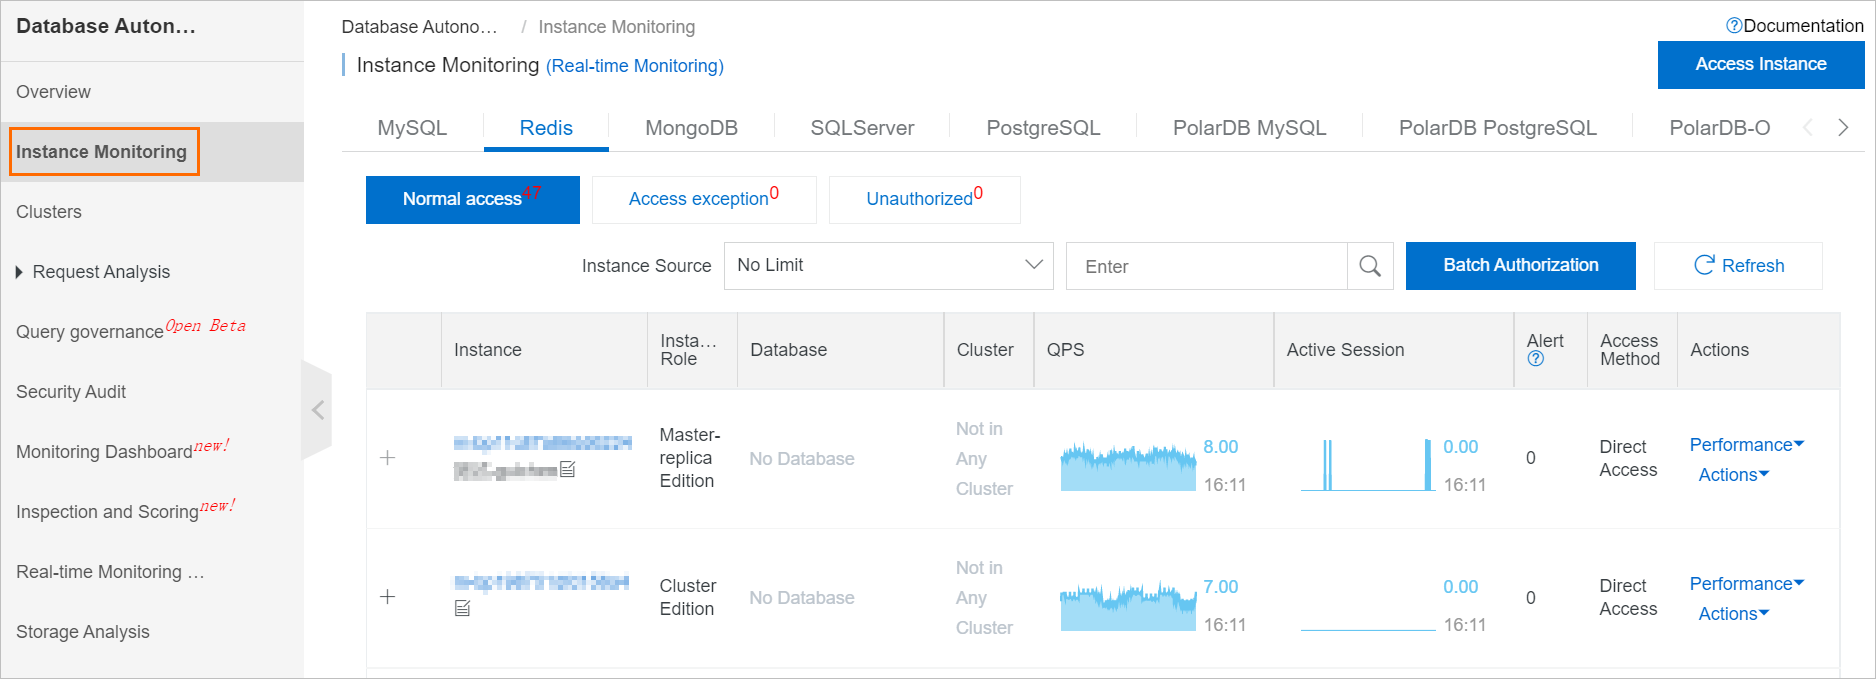 Instance Monitoring page